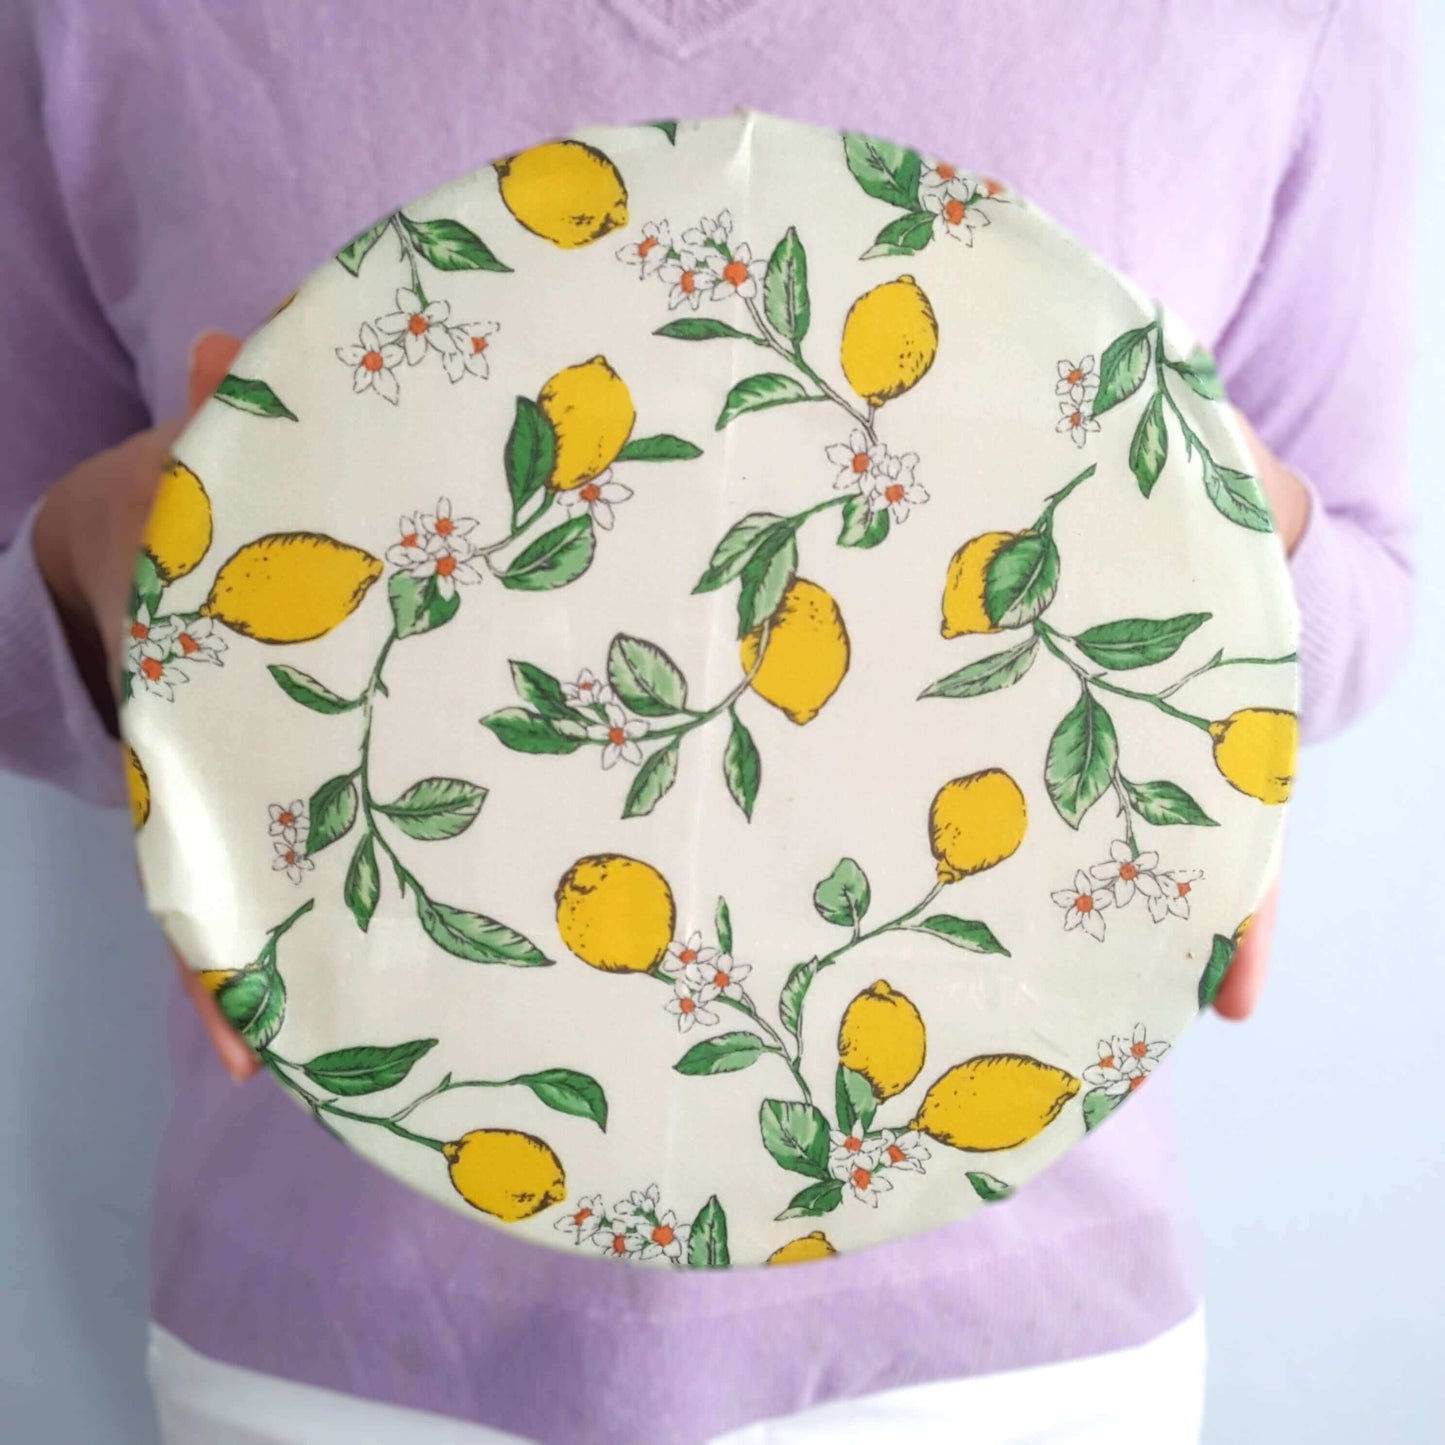 Lemony Bees Earth Kind Sandwich & Bowl Set of 2 Large Beeswax Wraps shown in use